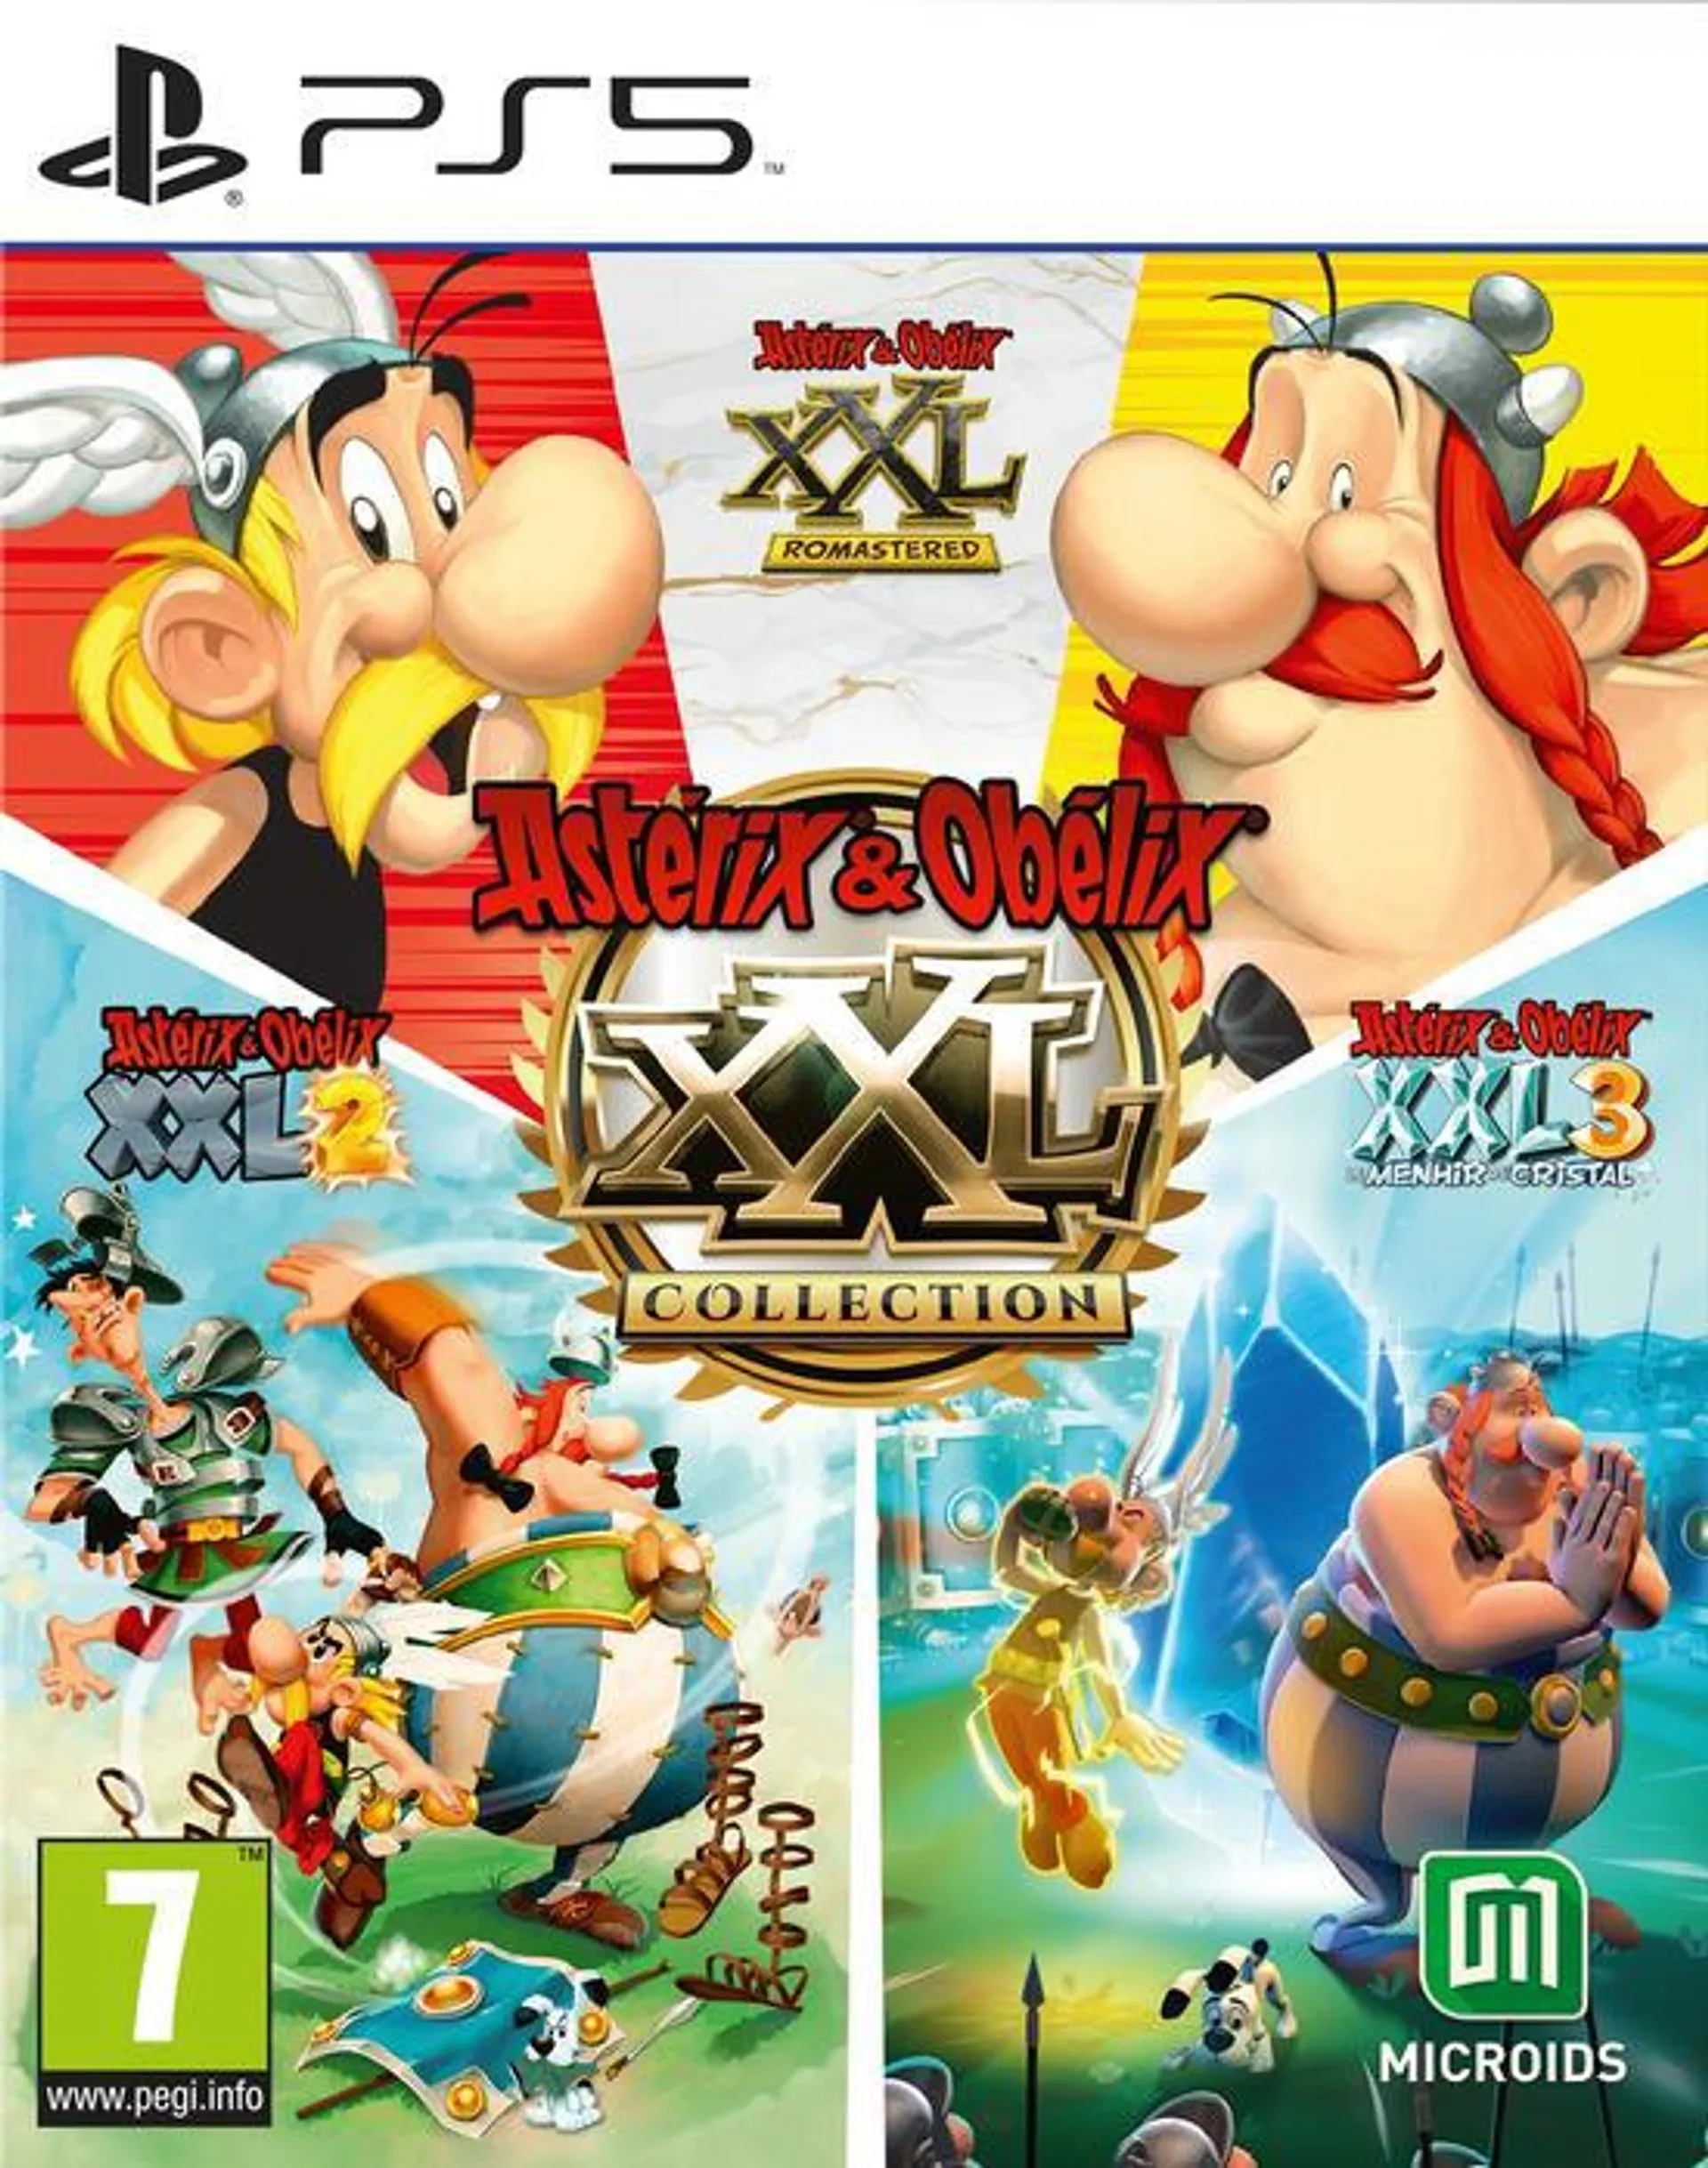 Asterix & Oberlix XXL Collection